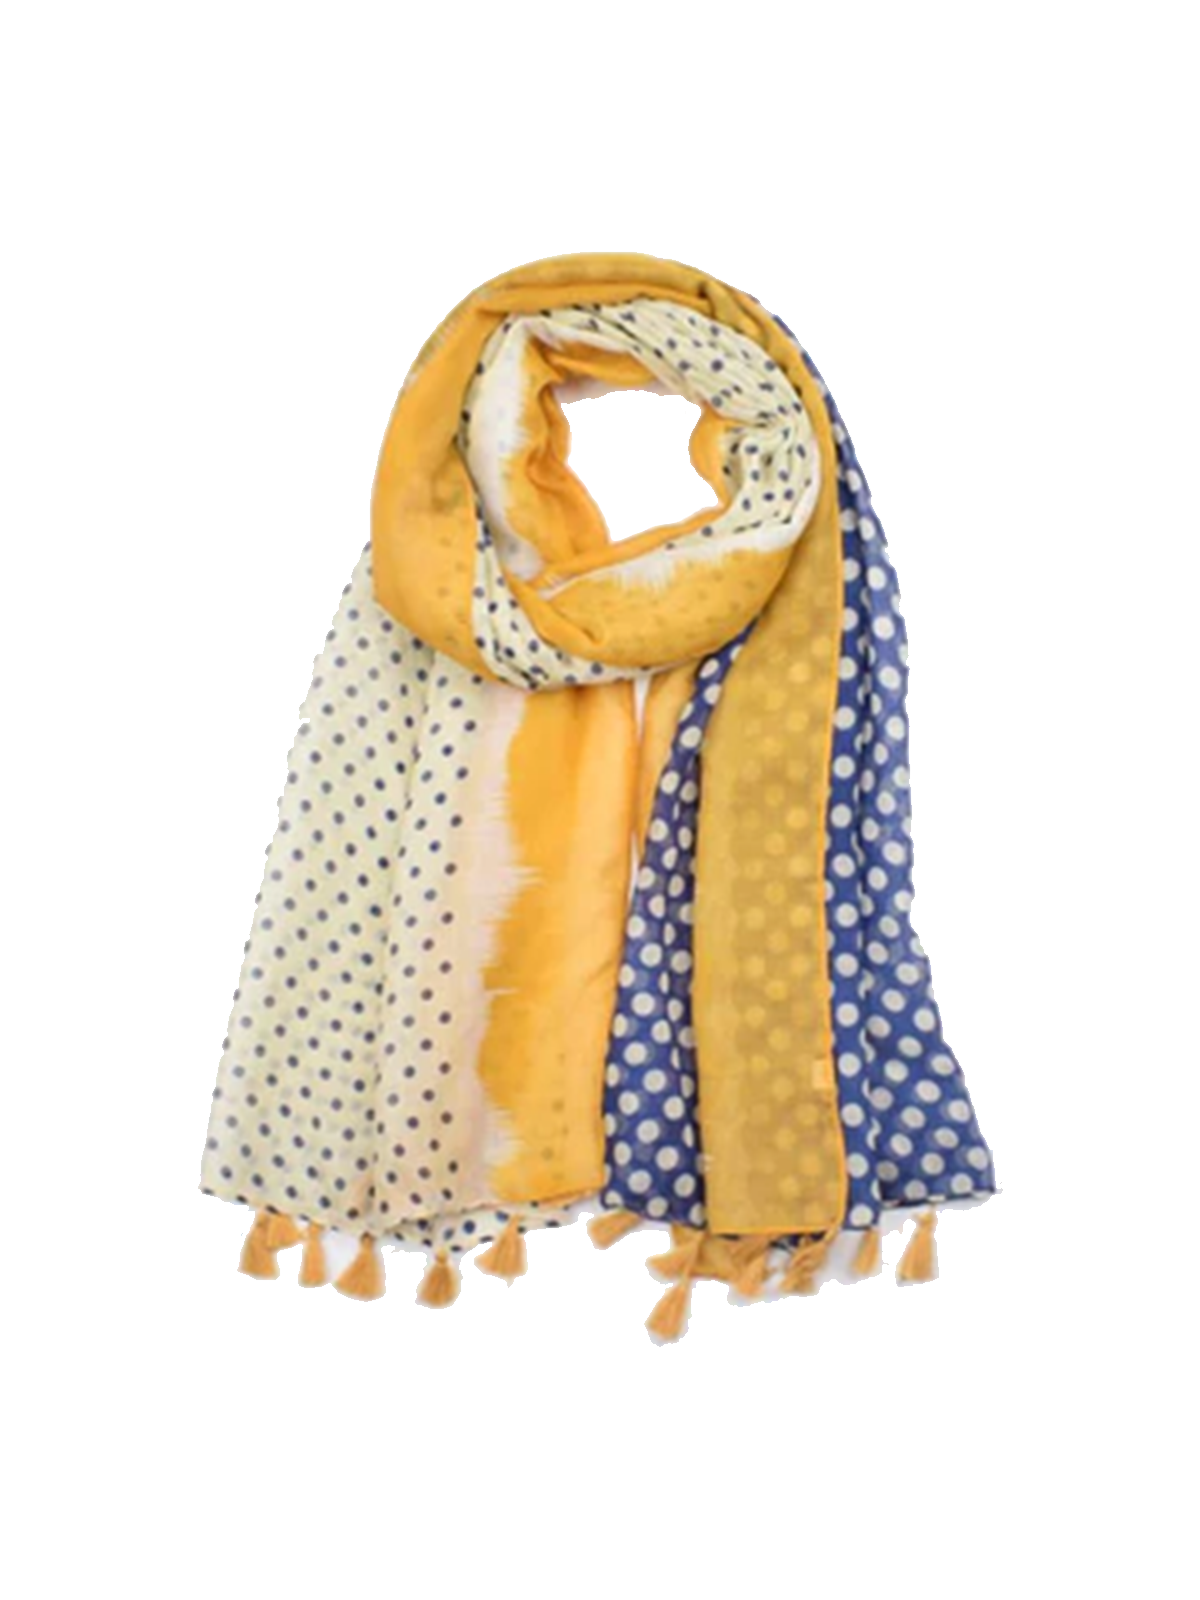 Blue and yellow polka dot scarf with tassels